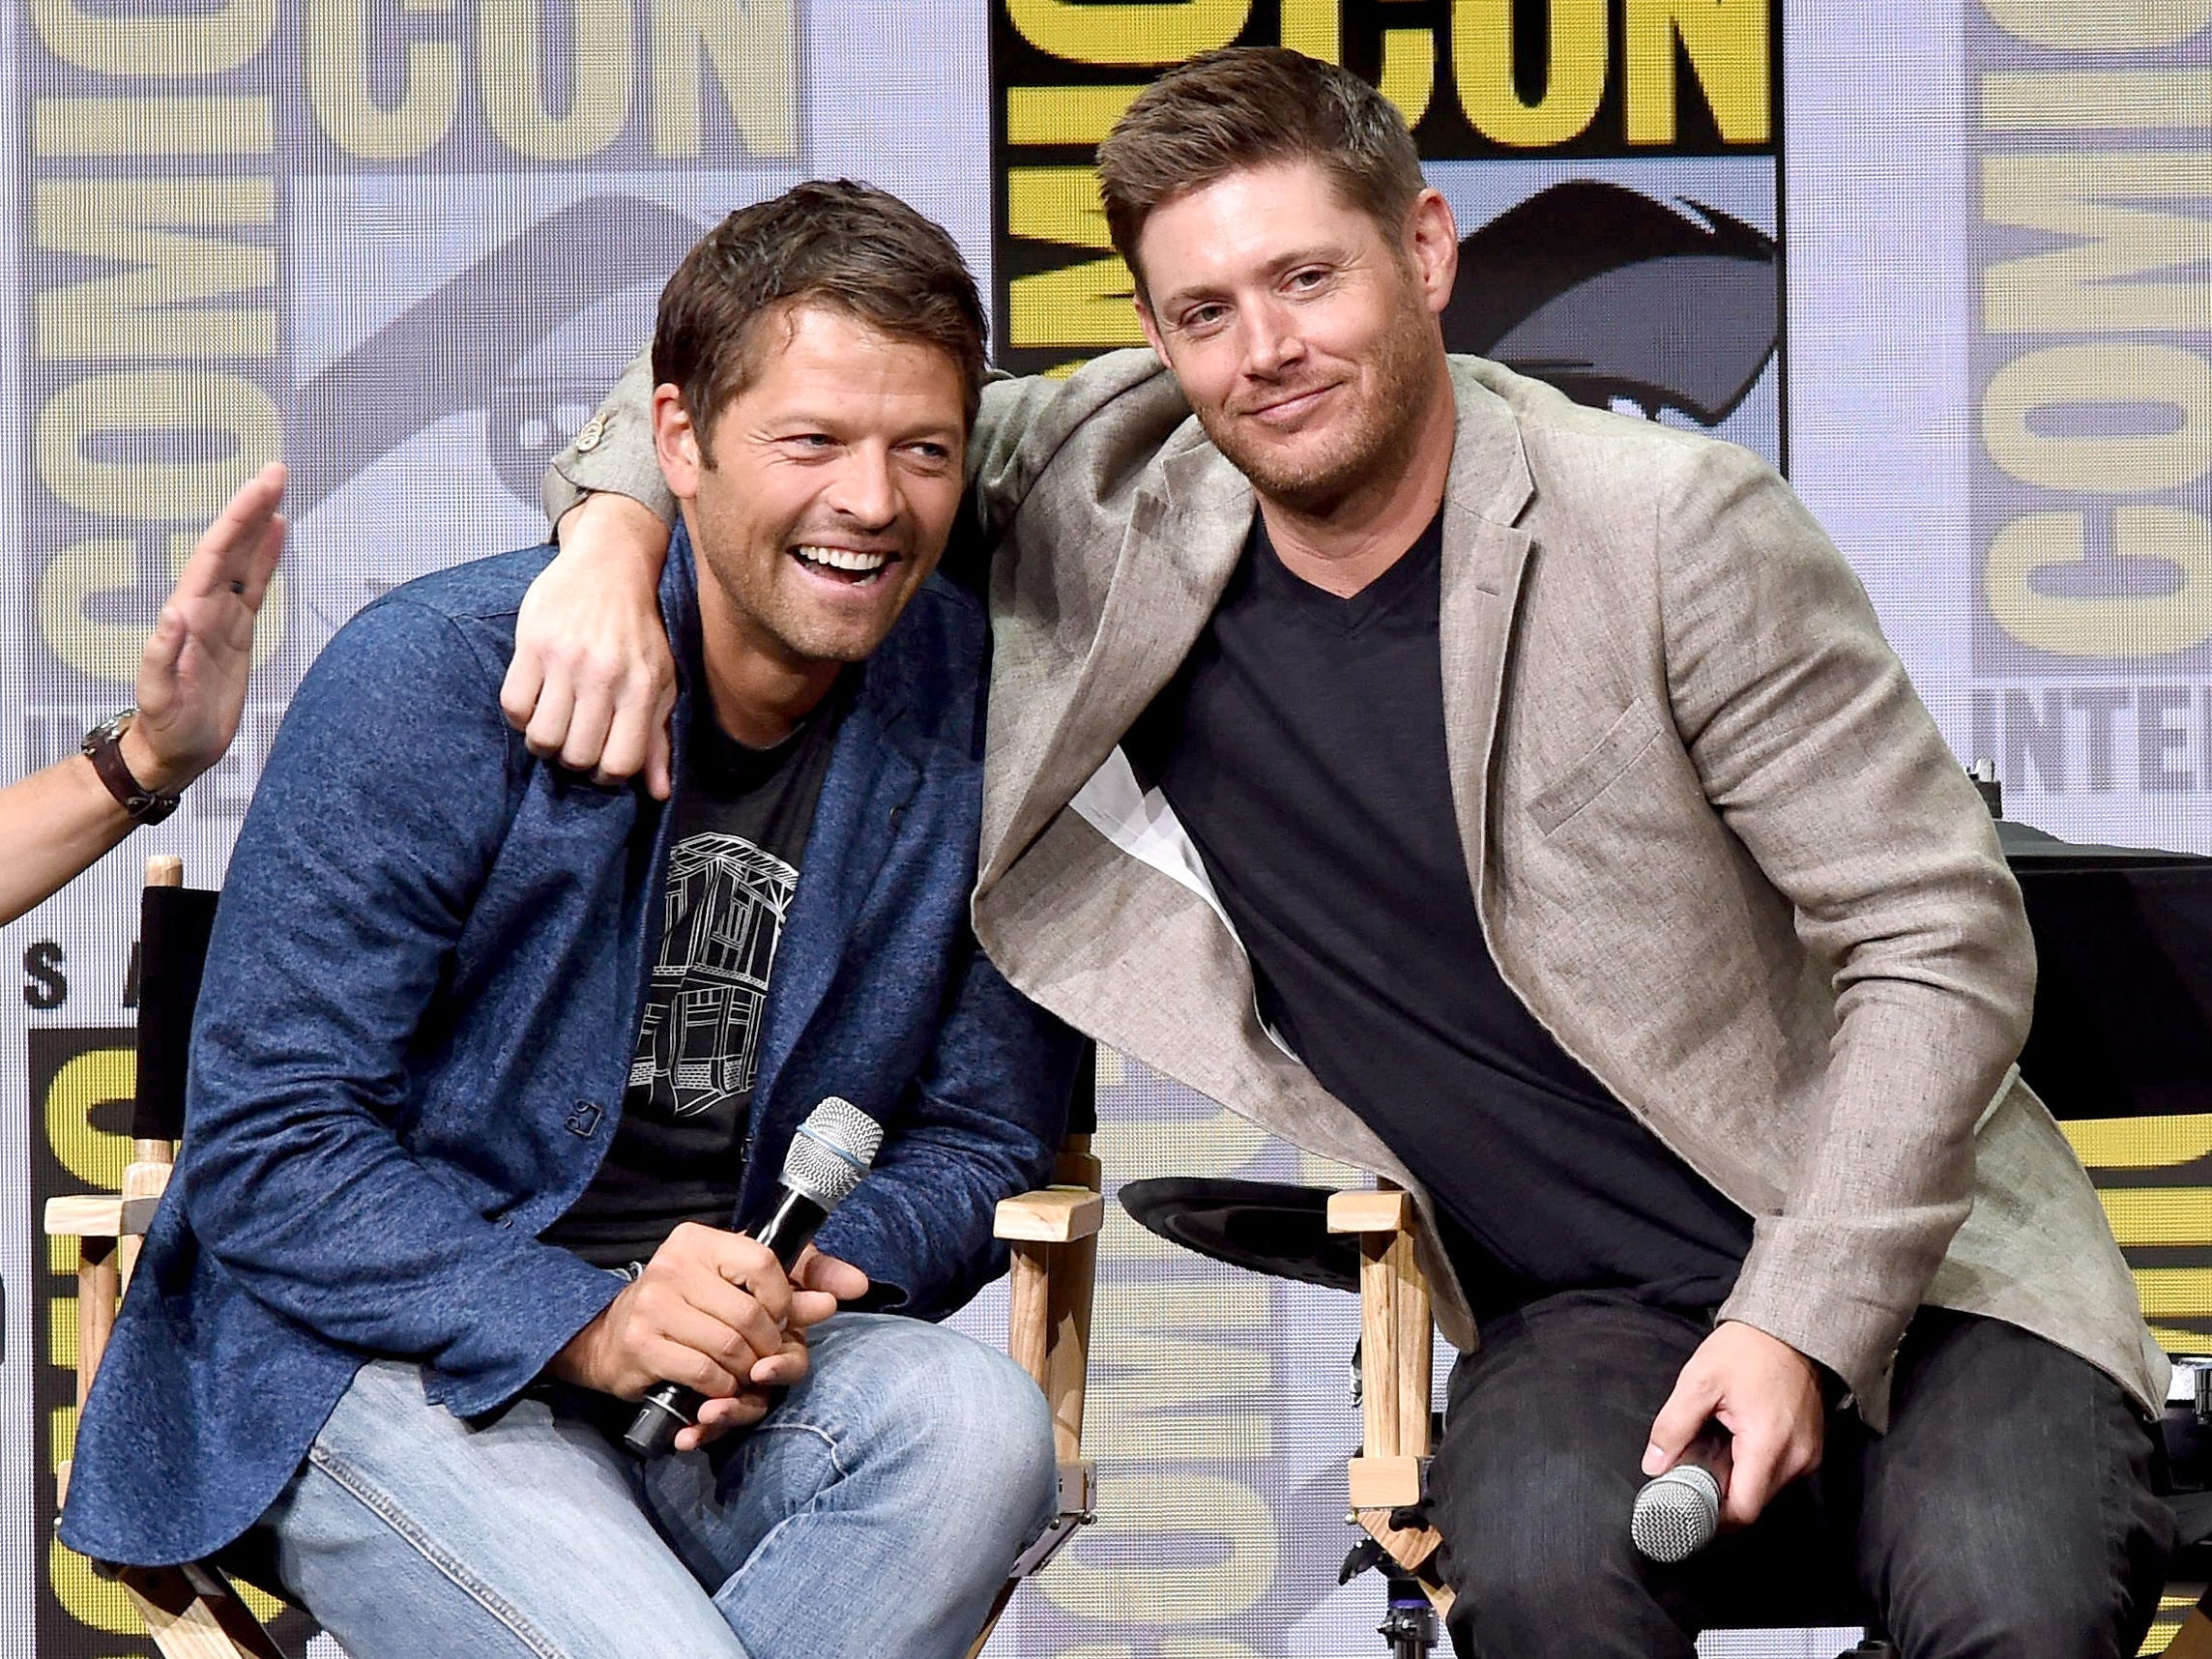 Actors Misha Collins (L) and Jensen Ackles at the "Supernatural" panel during Comic-Con International 2017 at San Diego Convention Center on July 23, 2017 in San Diego, California.